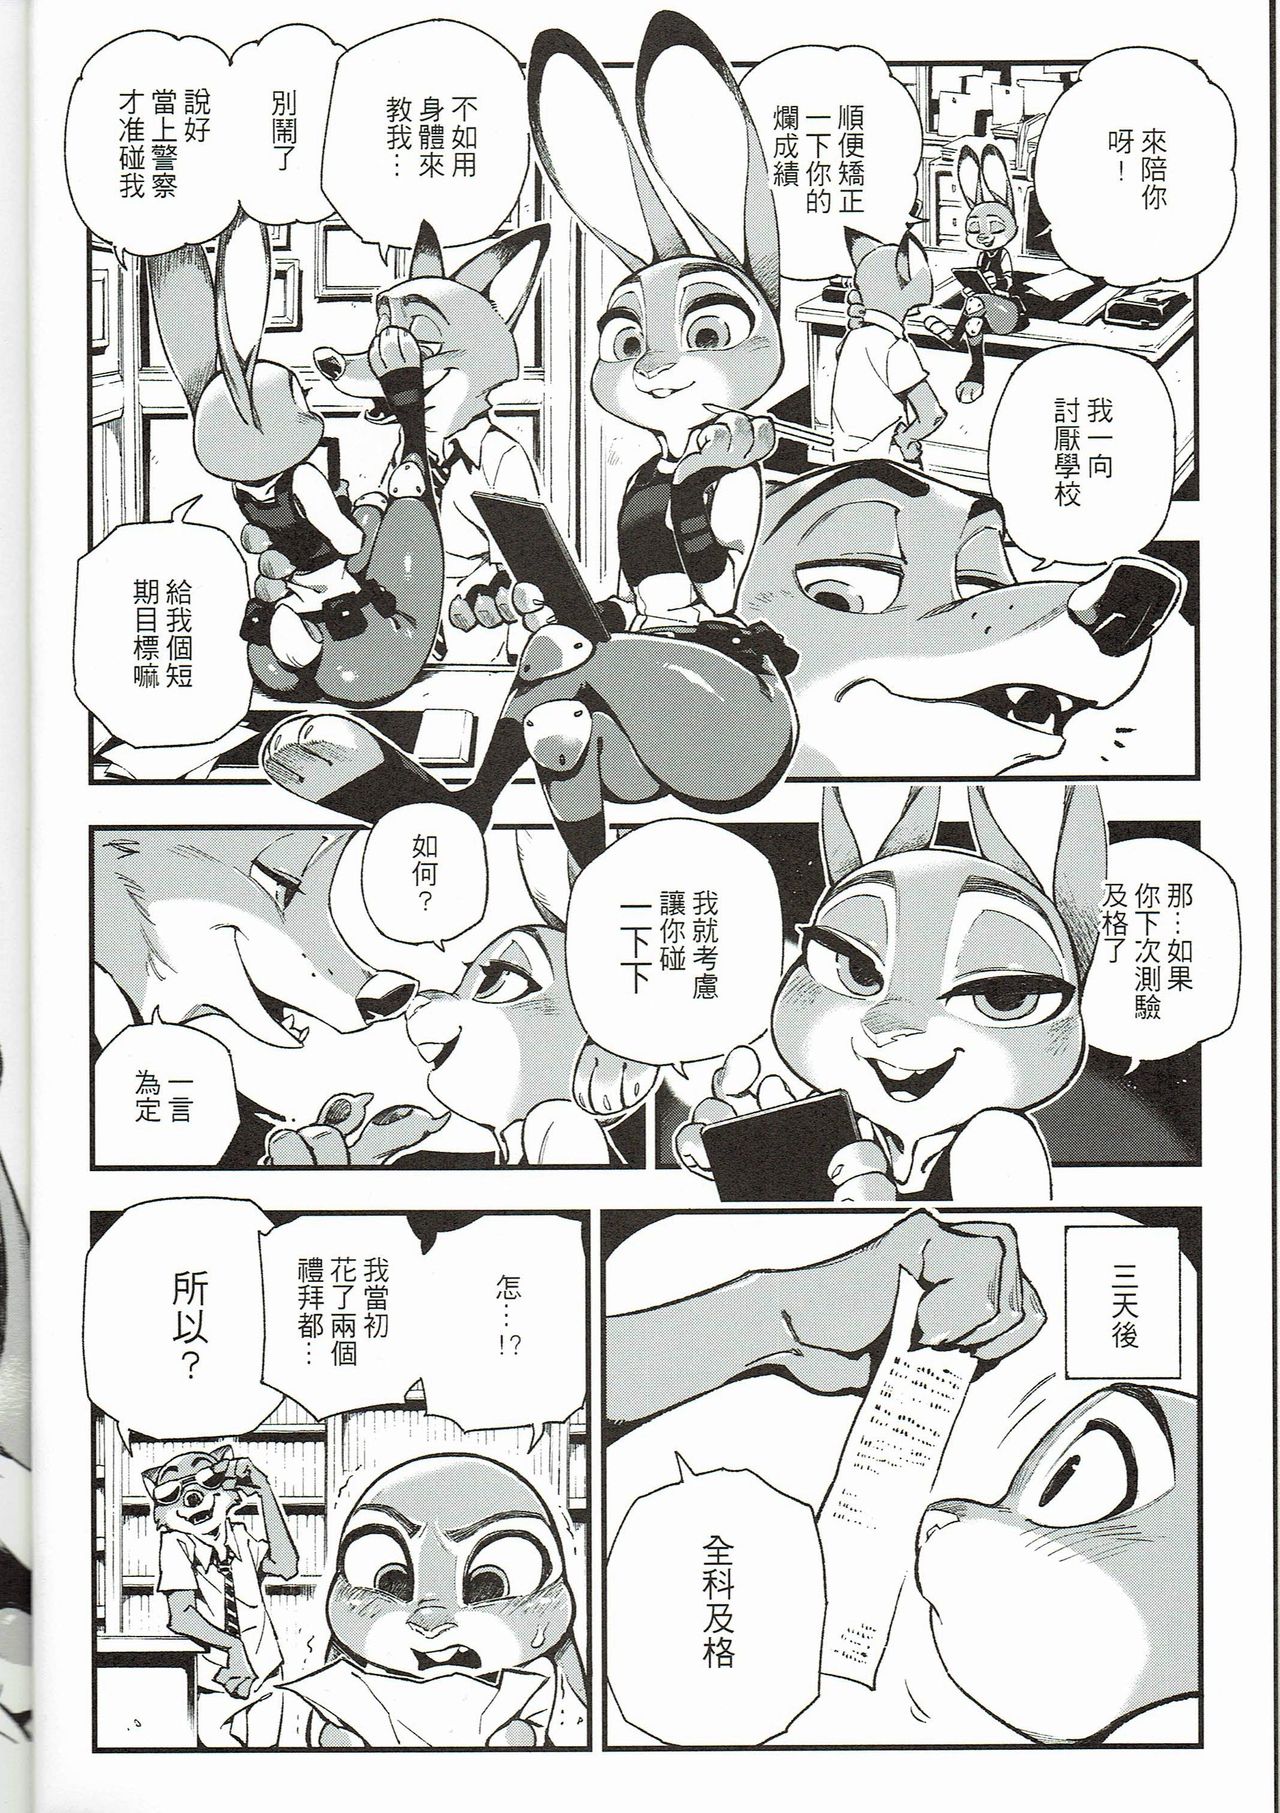 What Does The Fox Say? (FF28) [熊掌社 (俺正讀)] 狐狸怎麼叫? (ズートピア) [中国語]